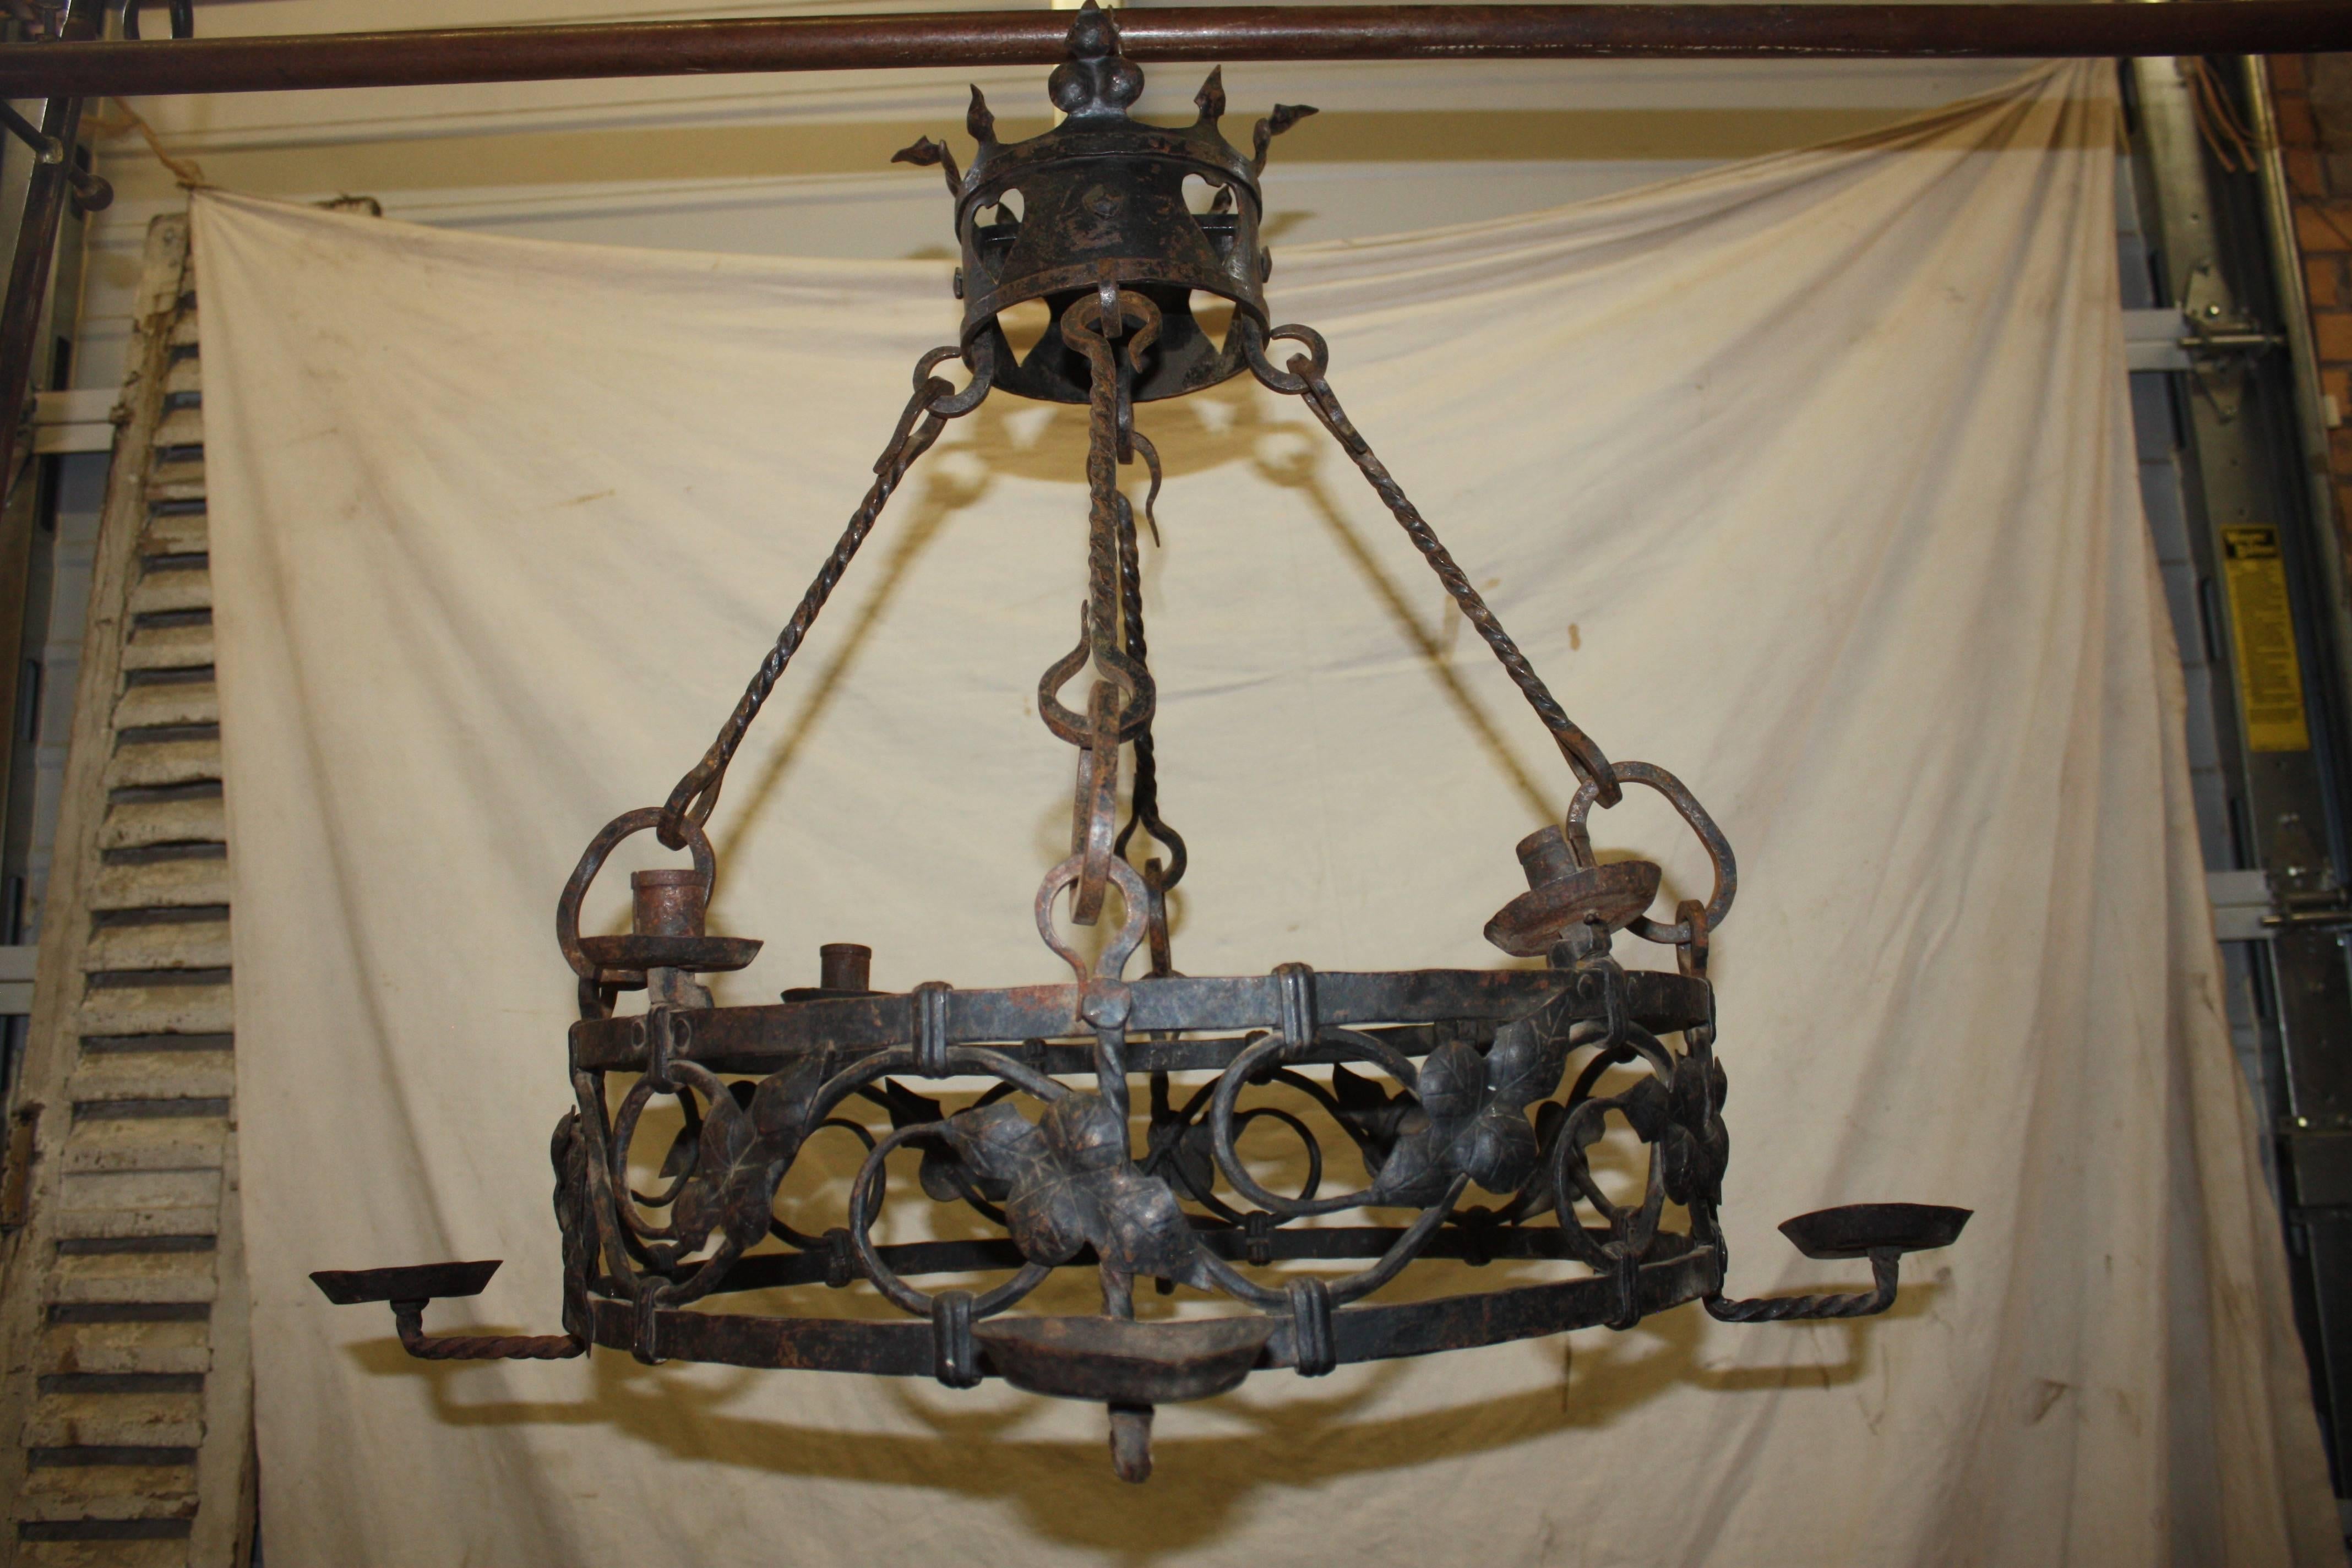 Beautiful 19th century French iron chandelier with 8 lights.